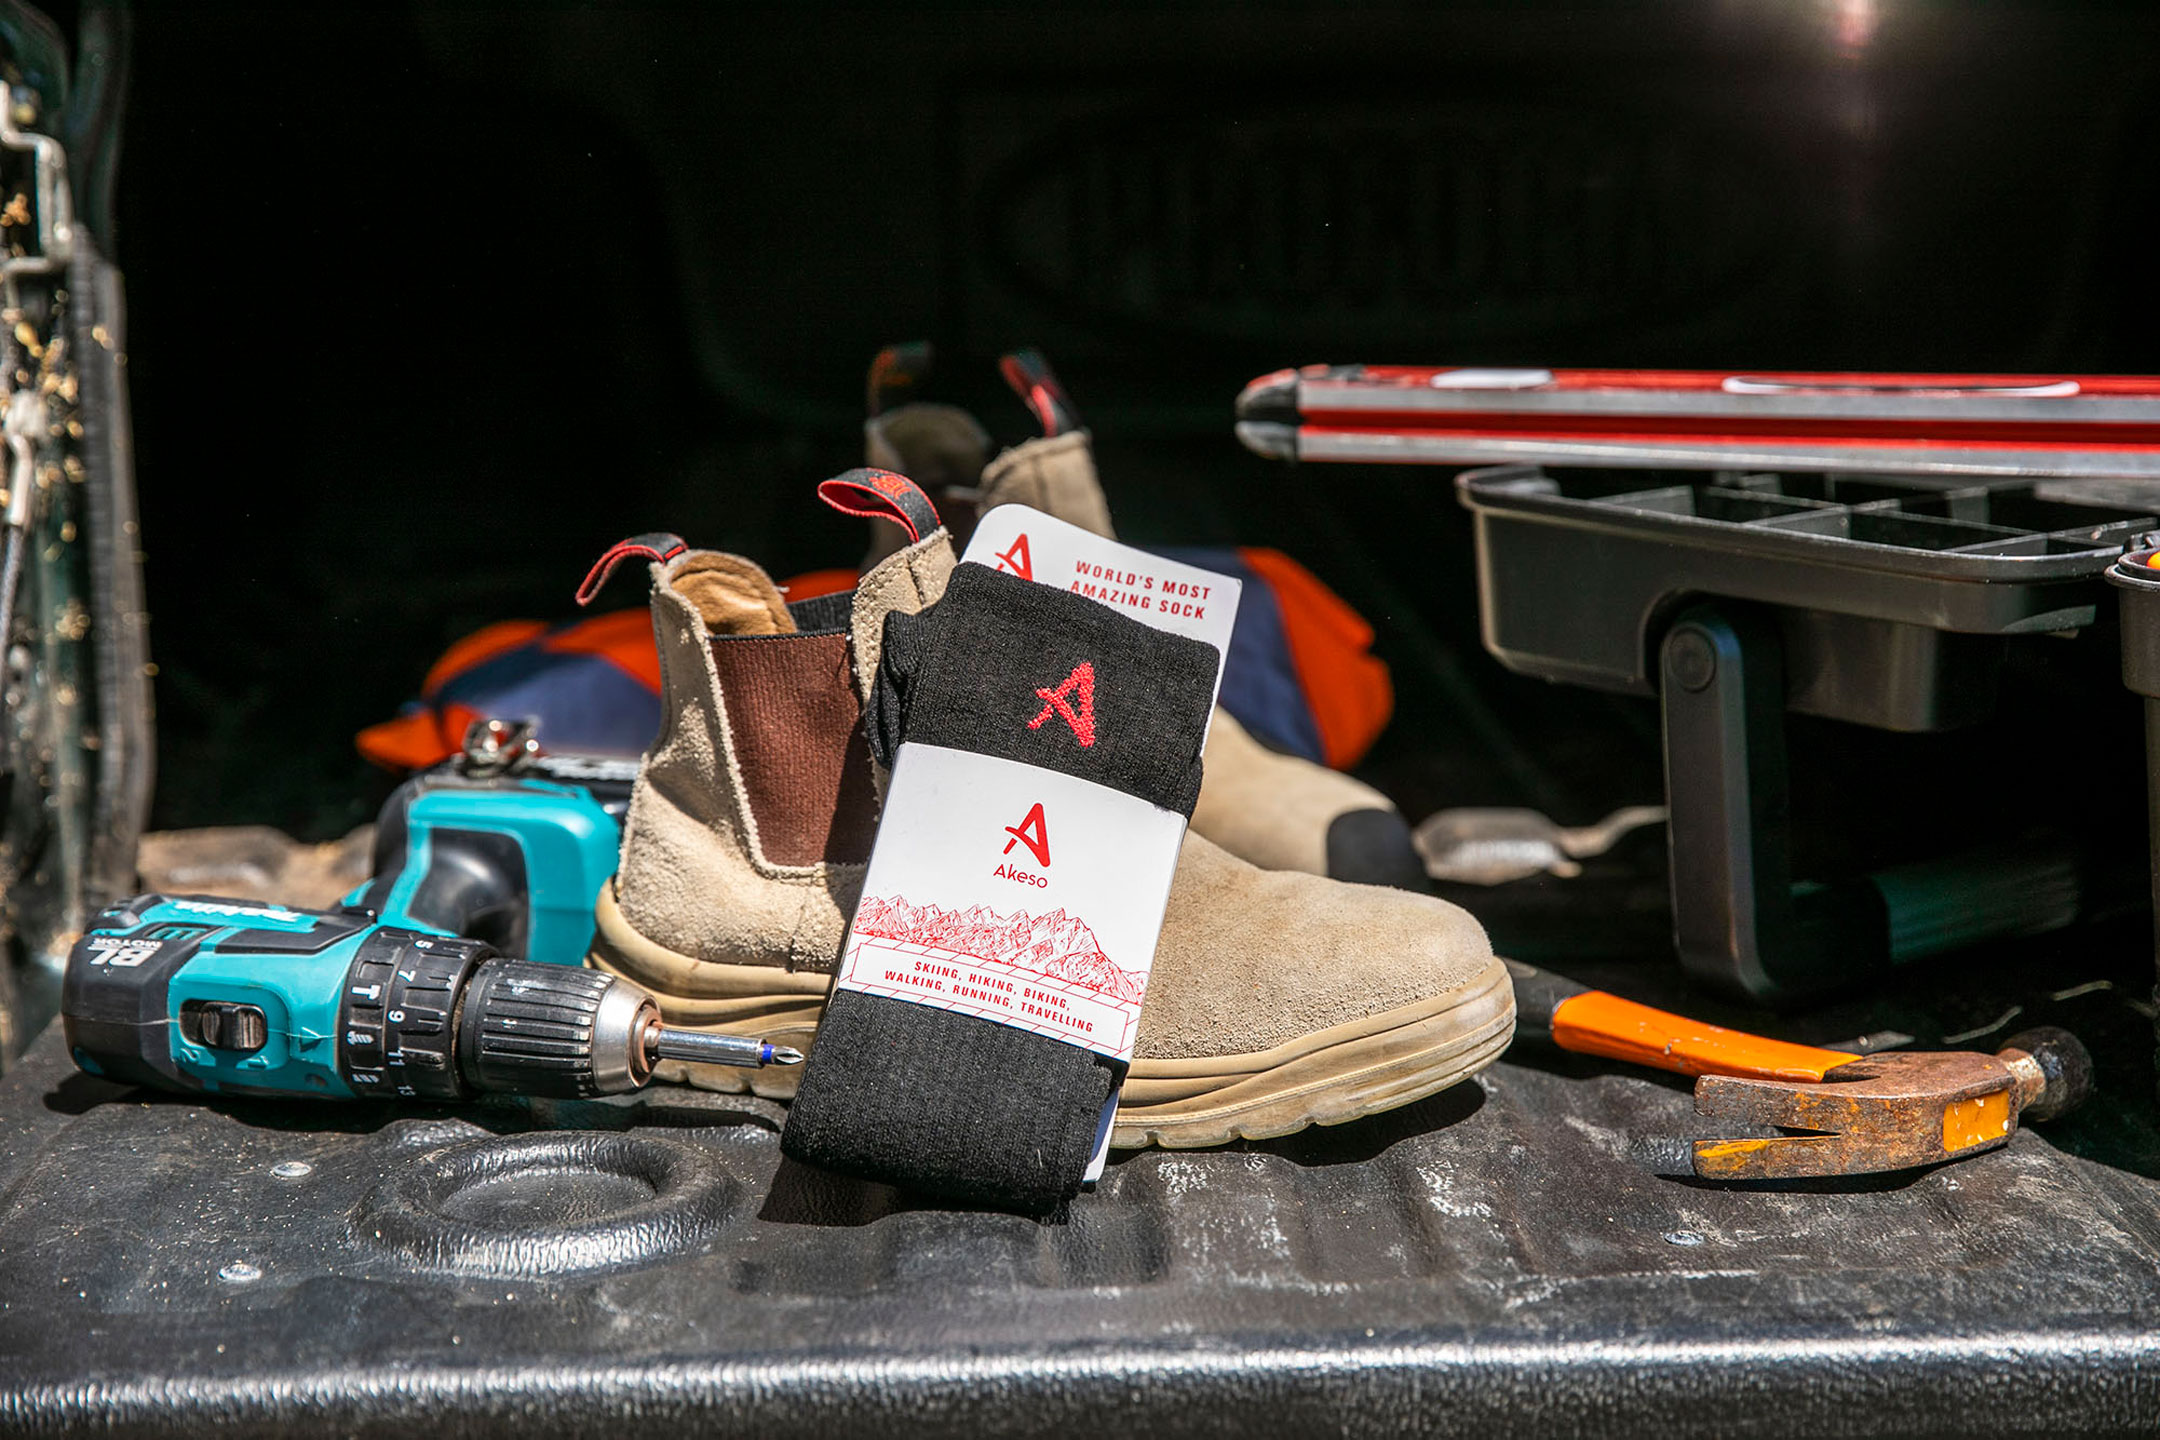 Akeso socks in back of truck with tools